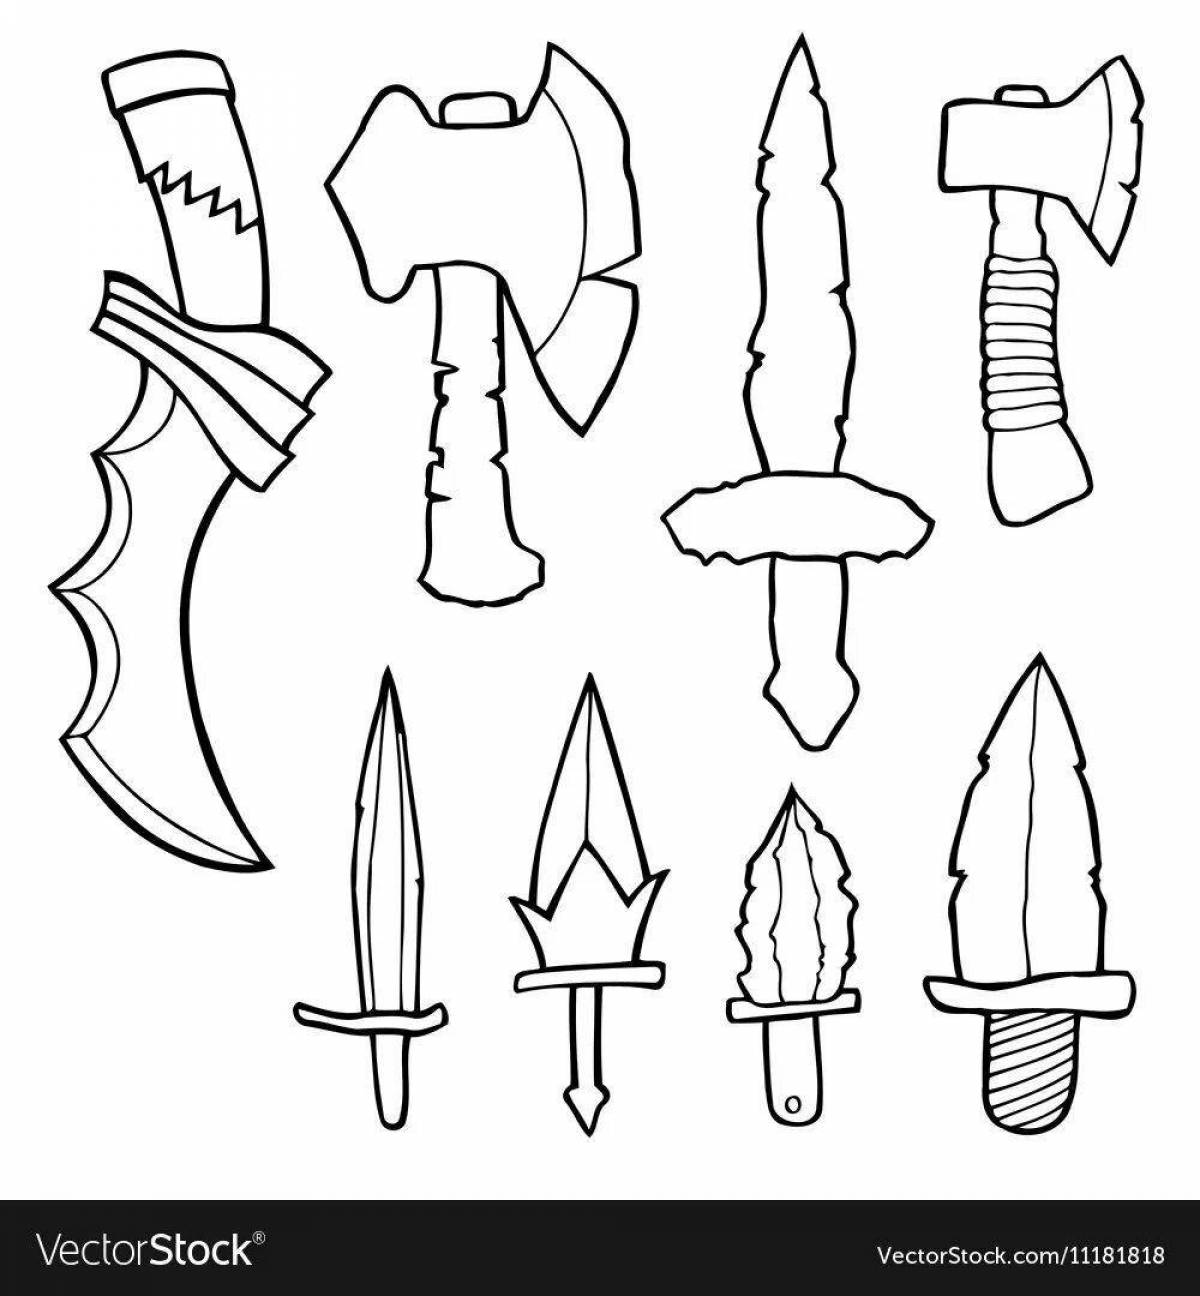 Coloring page of adorable scorpion knife from standoff 2